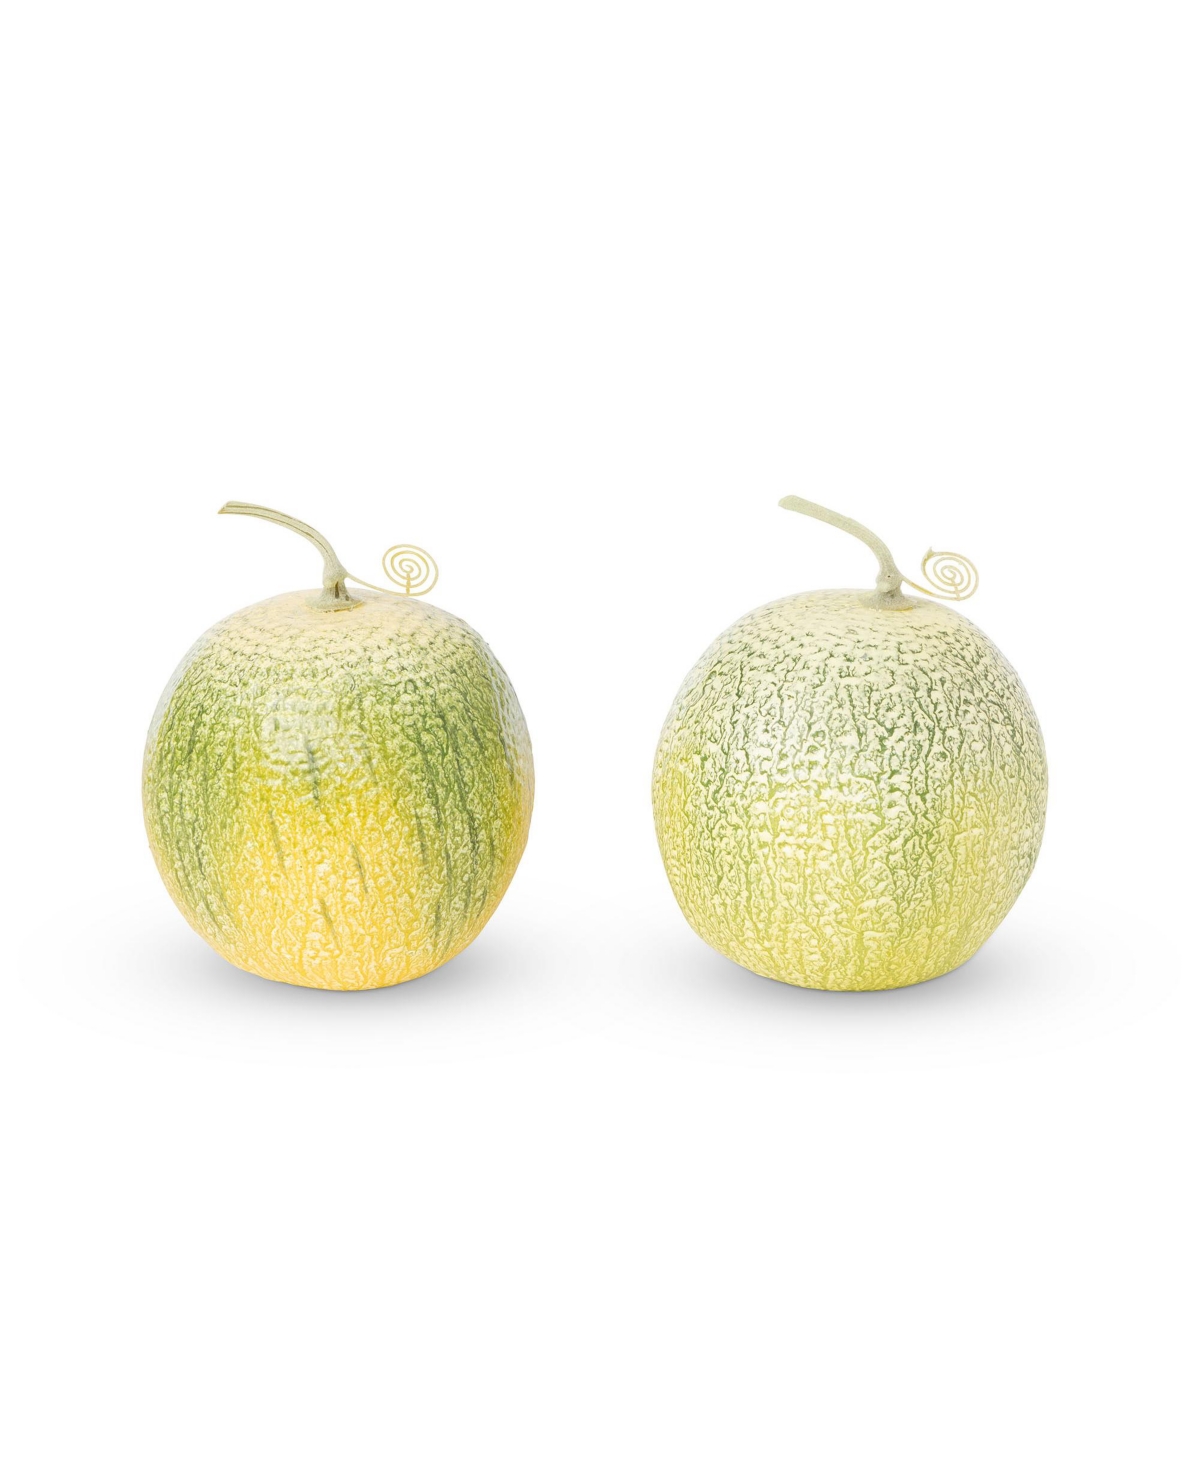 Marketplace Crafted Cantaloupe, Set of 2 Assorted Colors - Open Miscellaneous